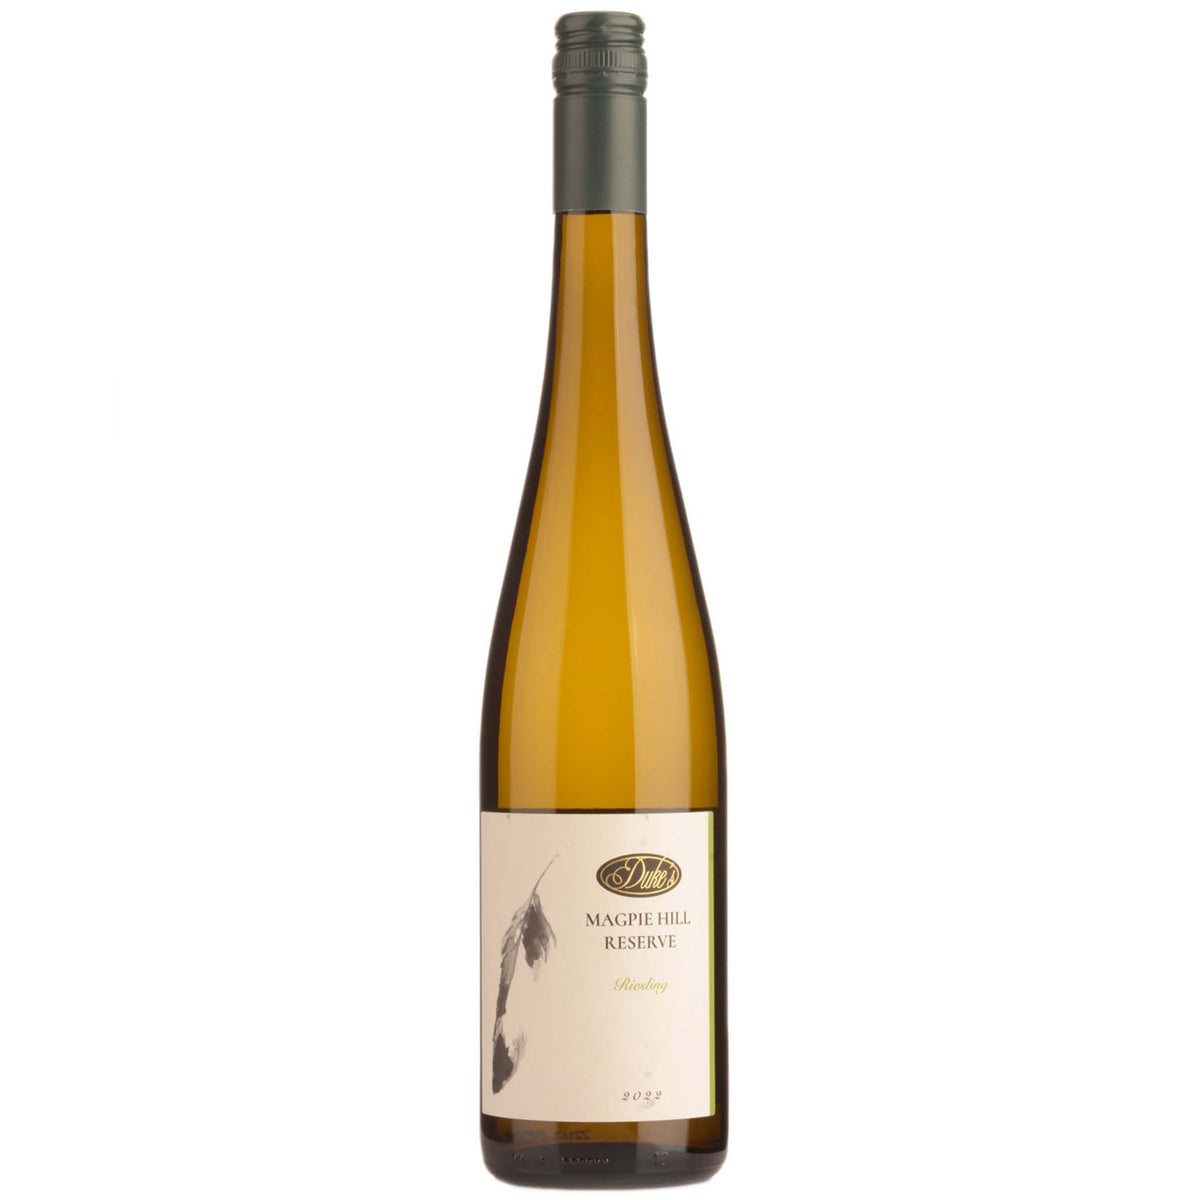 Duke's-Magpie-Hill-Reserve-Riesling-2022